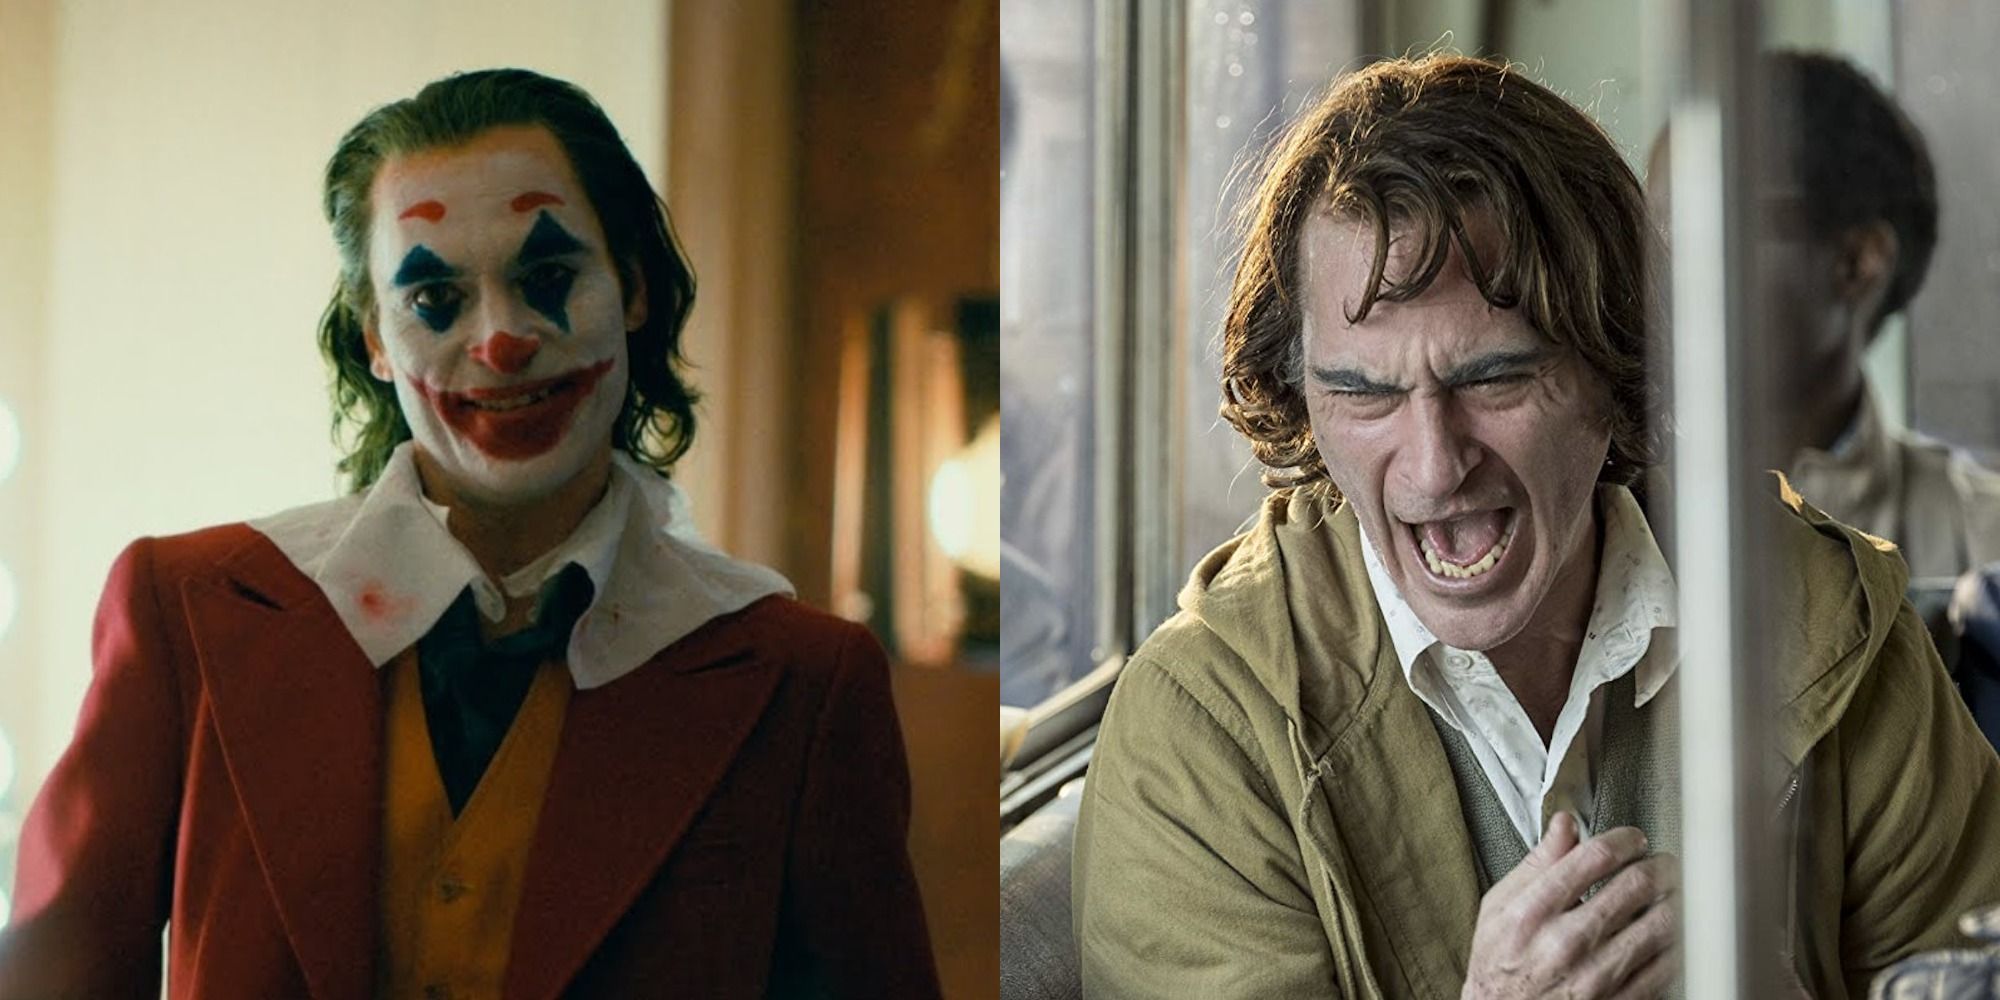 20 Joker Movie Quotes That Will Stick With Us Forever